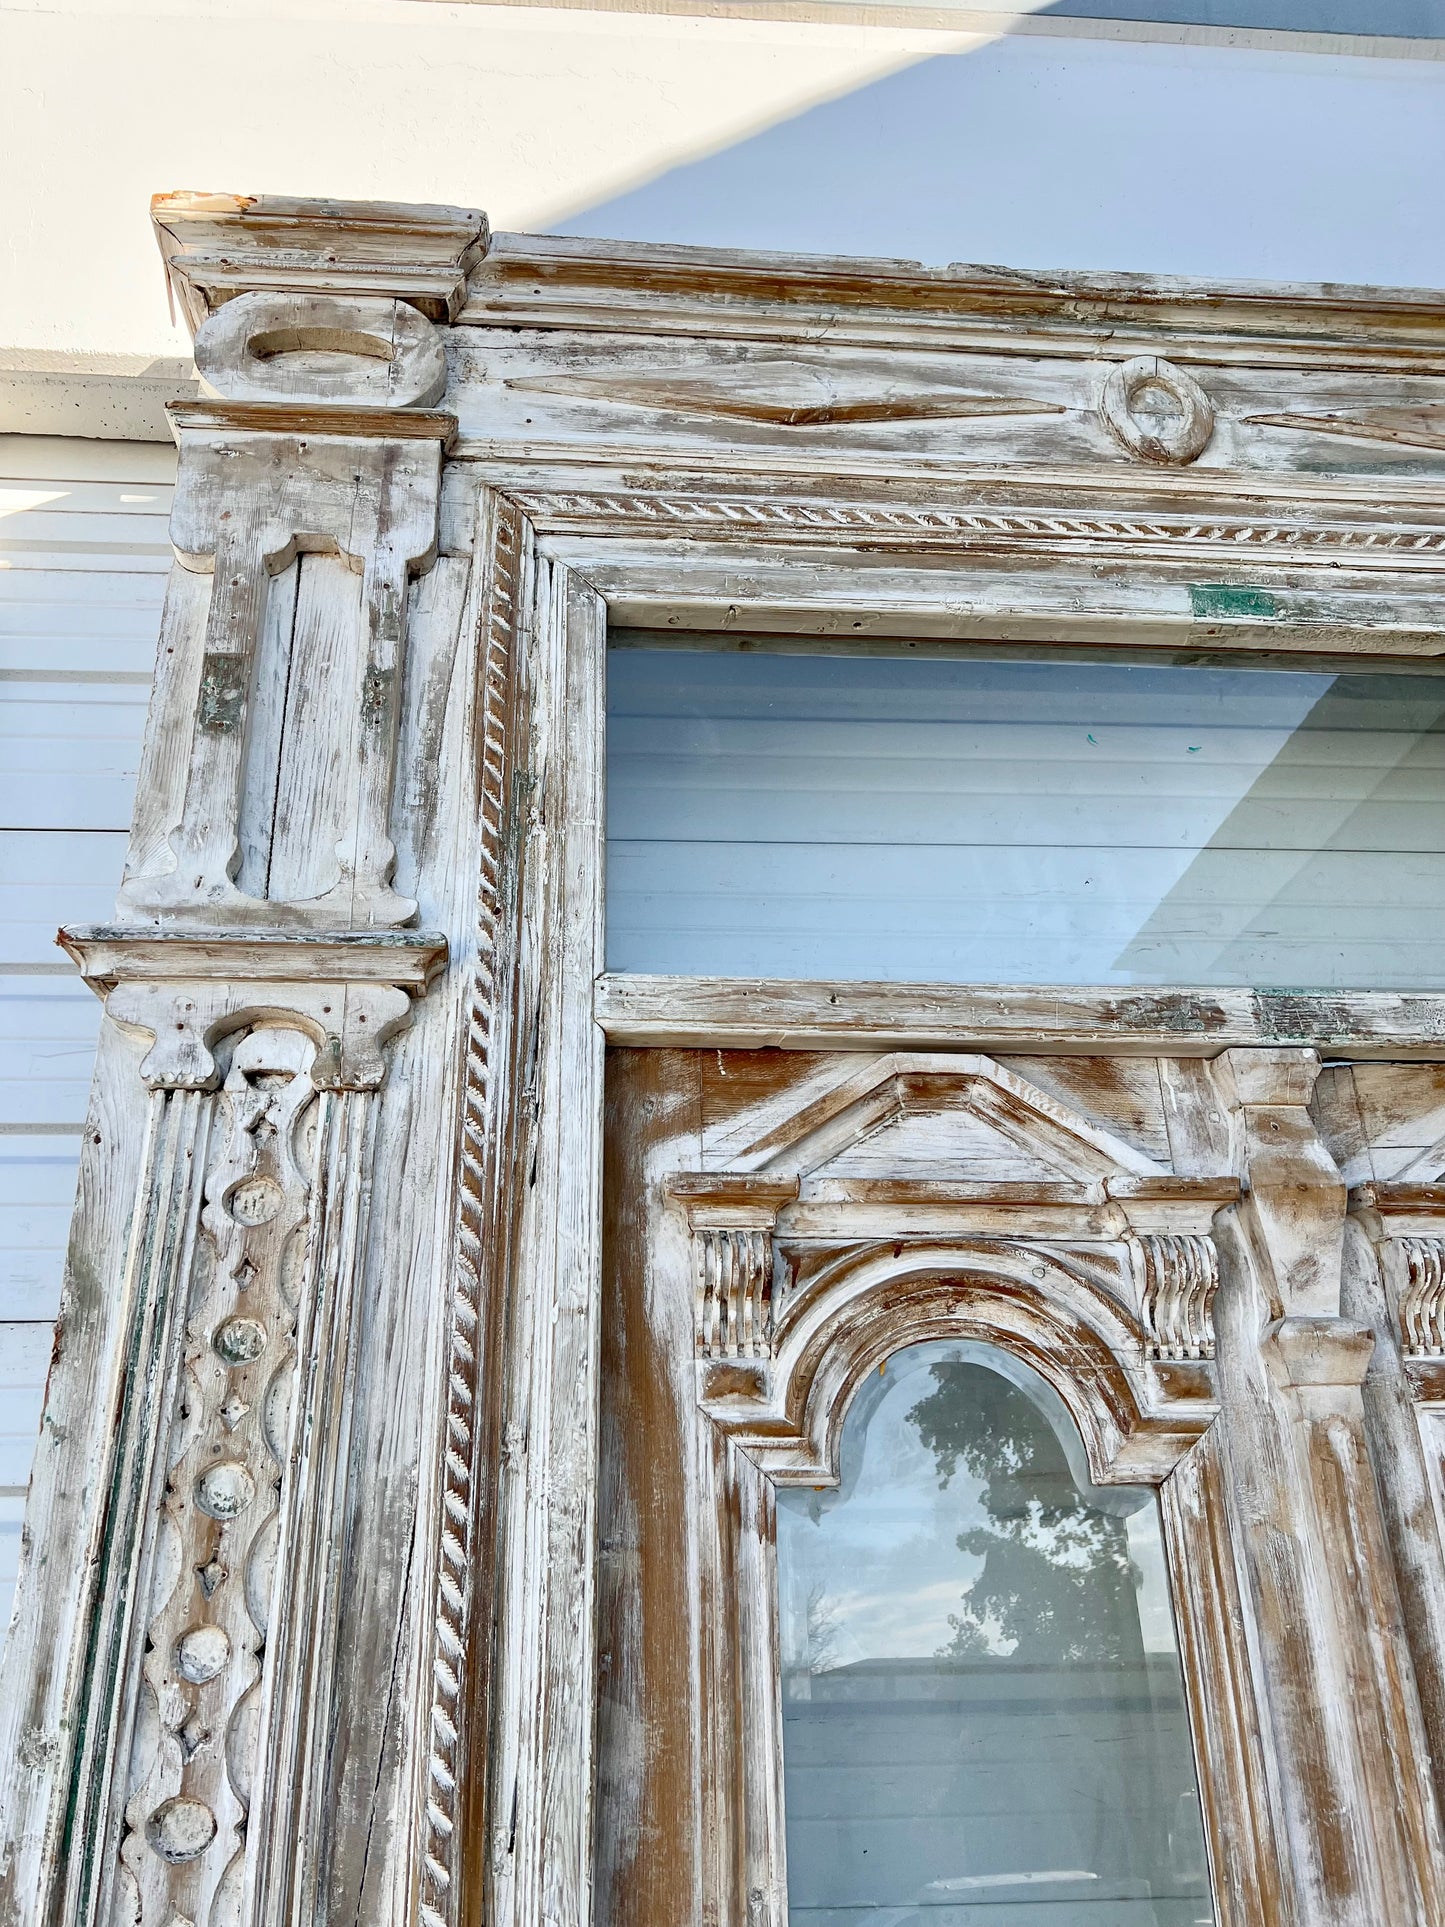 Pair of Ornately Carved Antique Doors in Large Frame with Transom